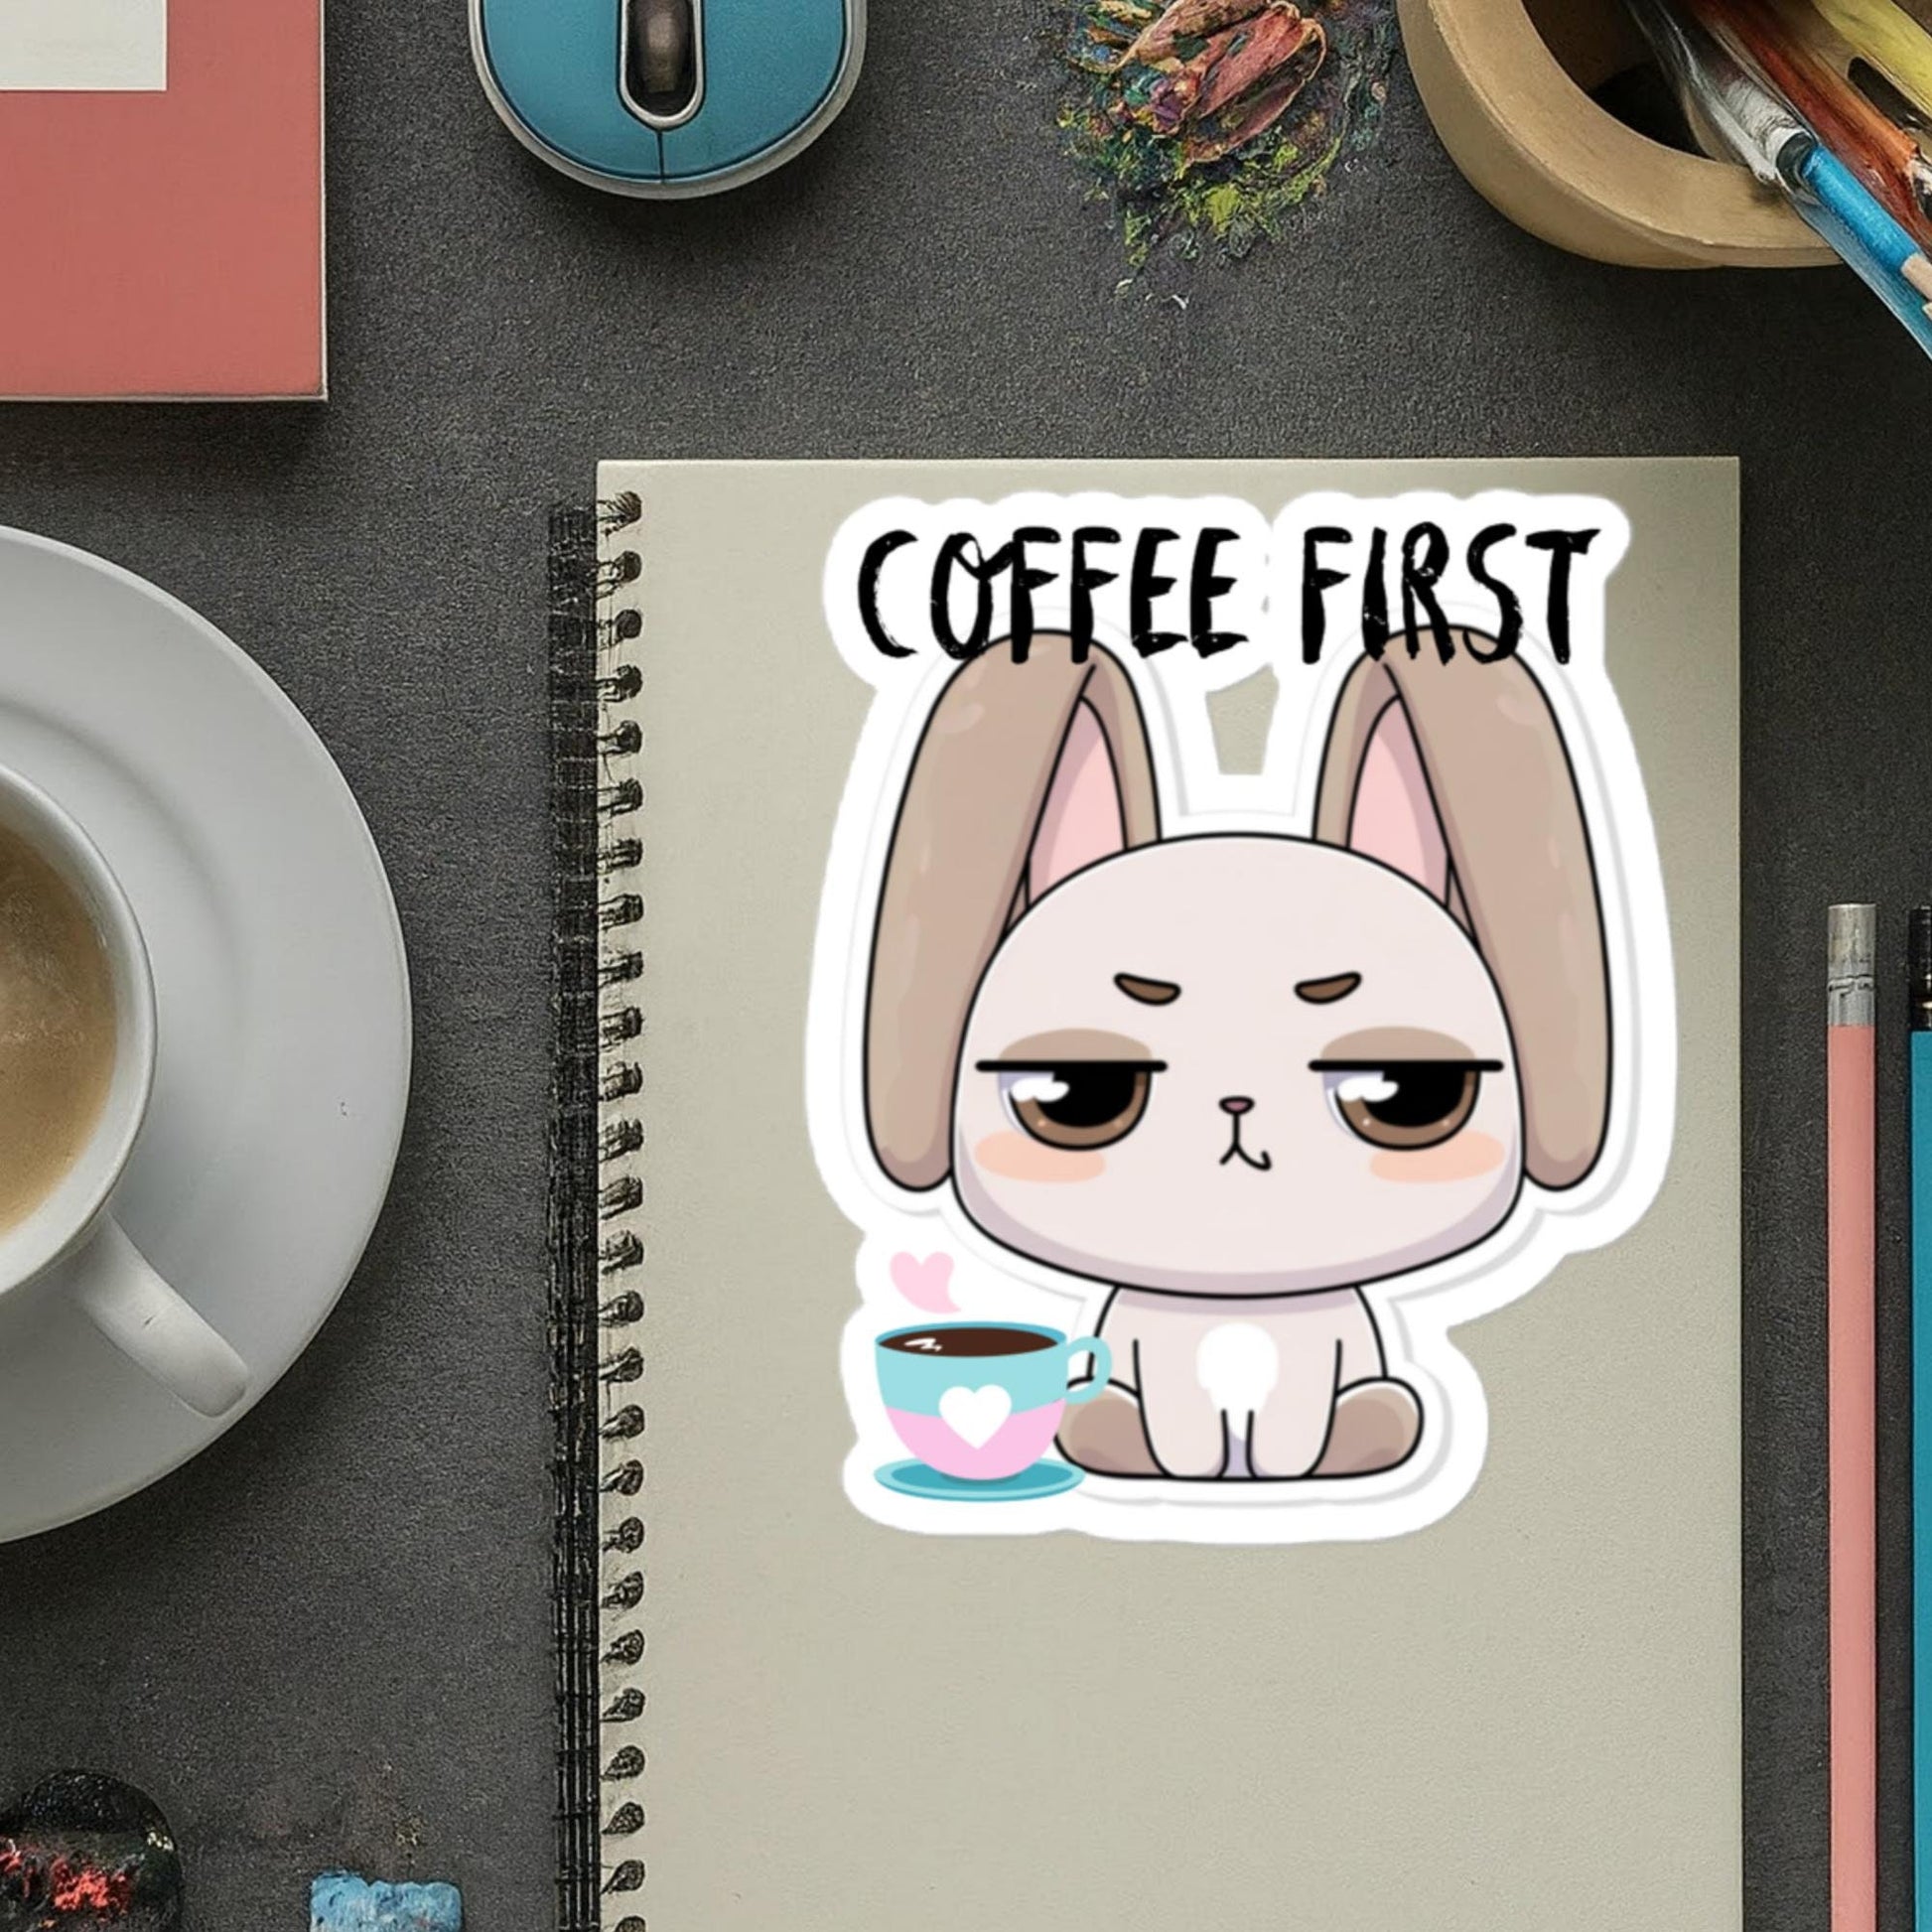 Bunny need Coffee First Sticker Coffee Humor Funny Bunny Sticker Bubble-free stickers